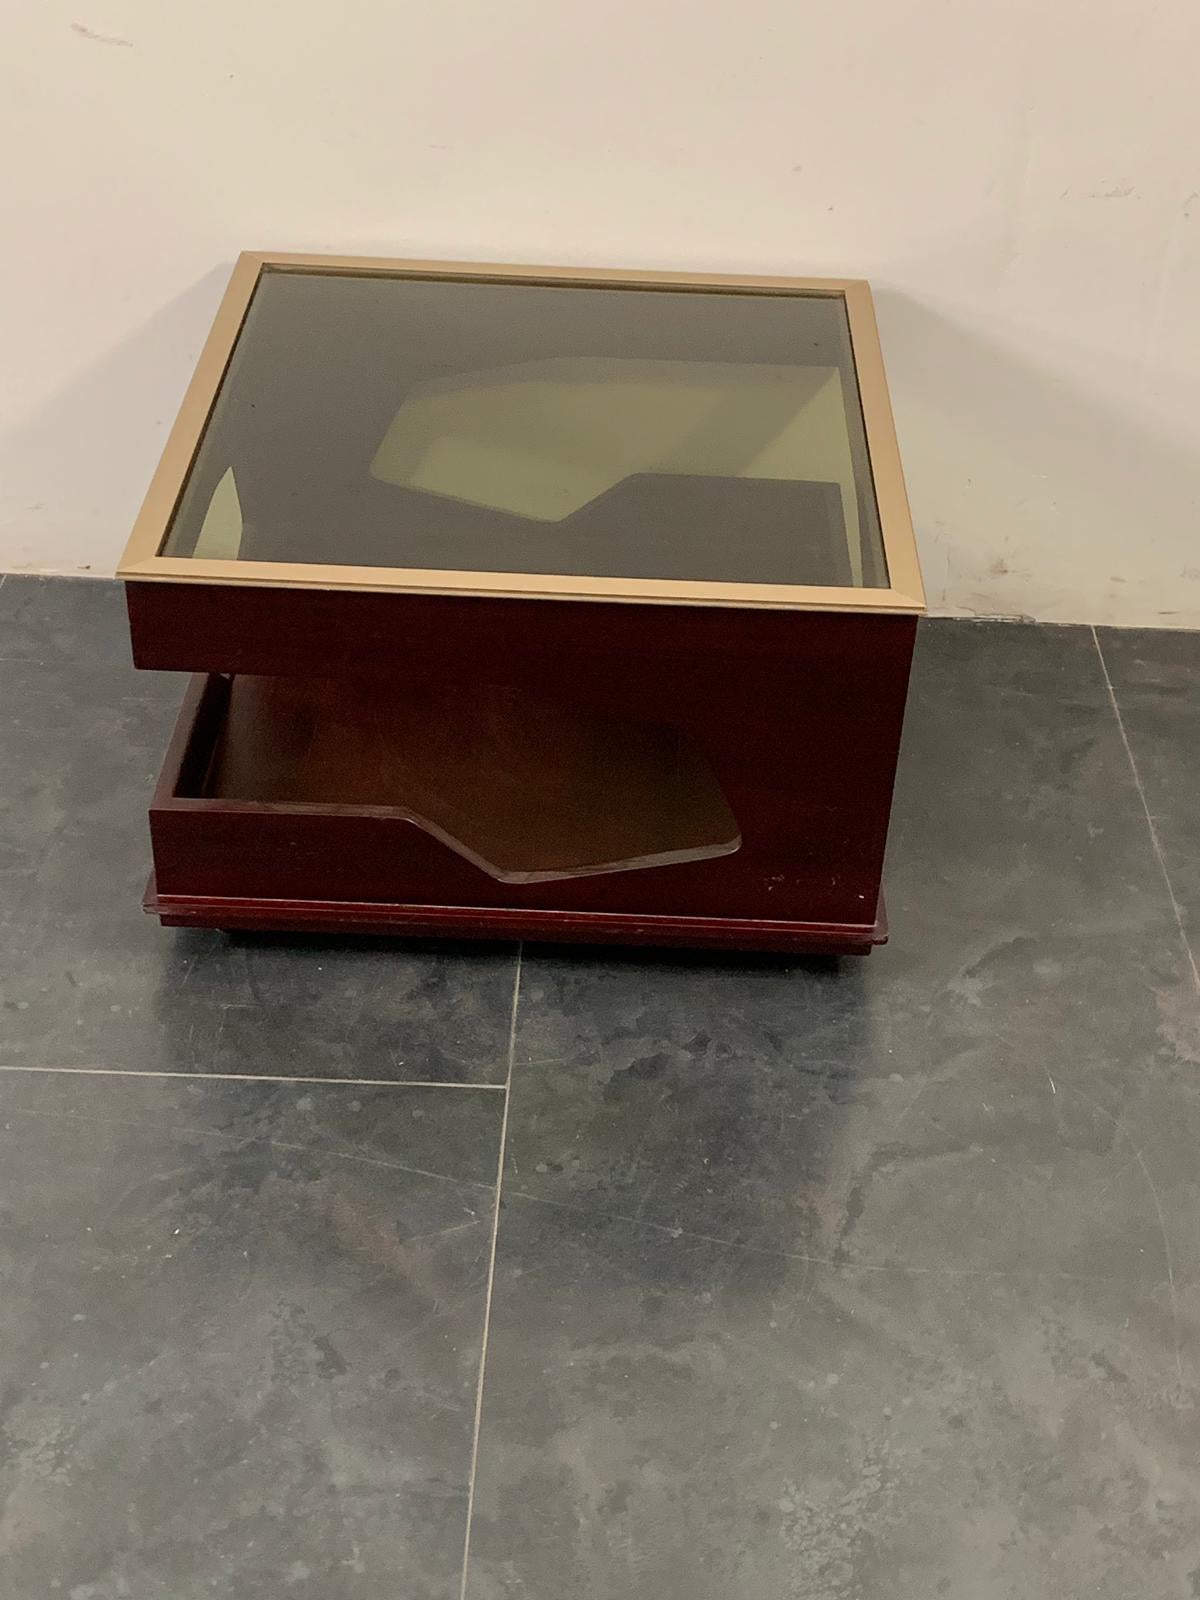 Singular coffee table from the 70s with futuristic lines, beautiful combination of mahogany and the profile of the top and the glass both burnished, under the base of the wheels.
Packaging with bubble wrap and cardboard boxes is included. If the